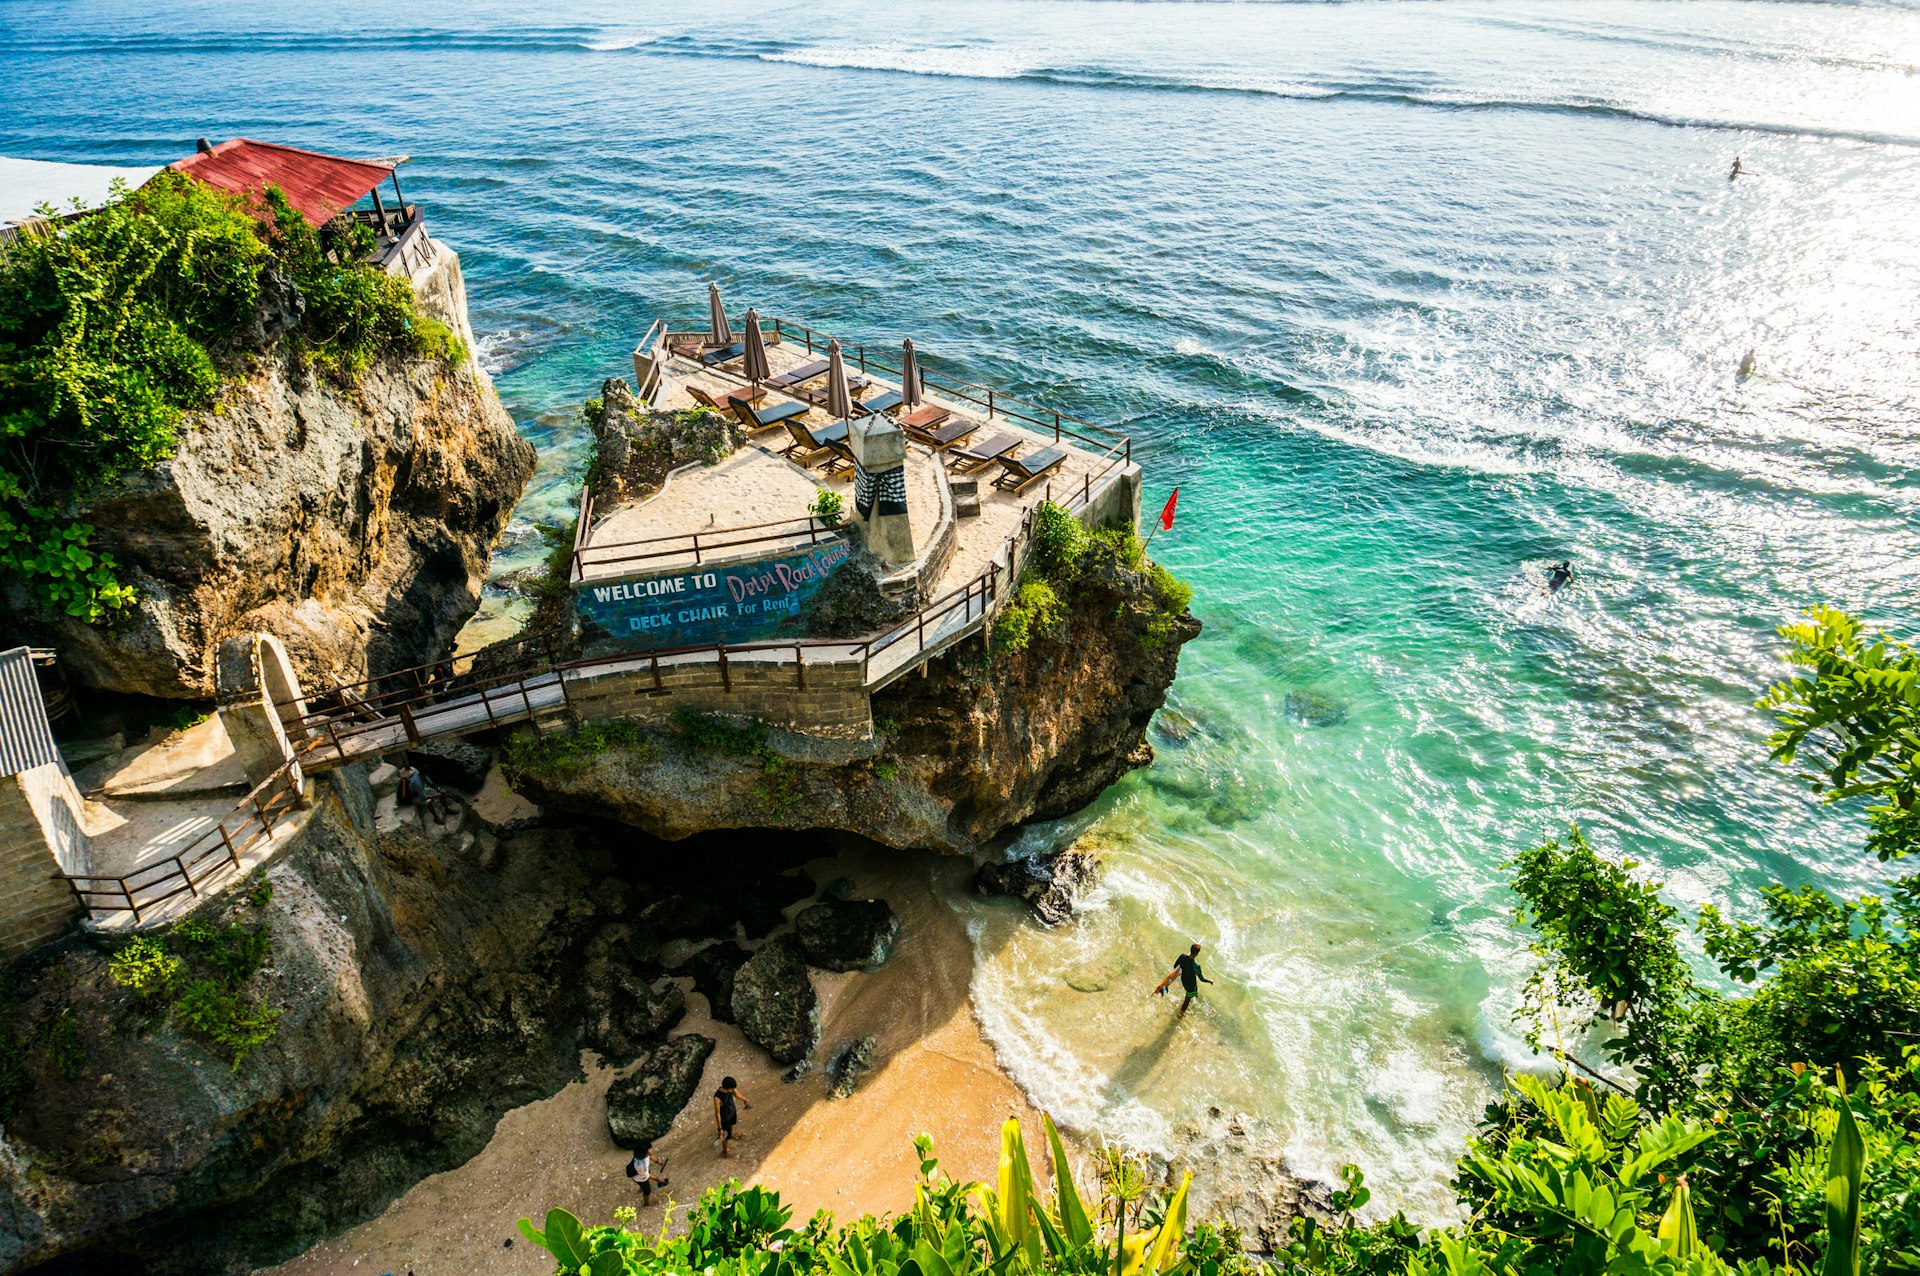 A surfer walking out to the ocean on Suluban Beach, near a sheer cliff with a lounge on top